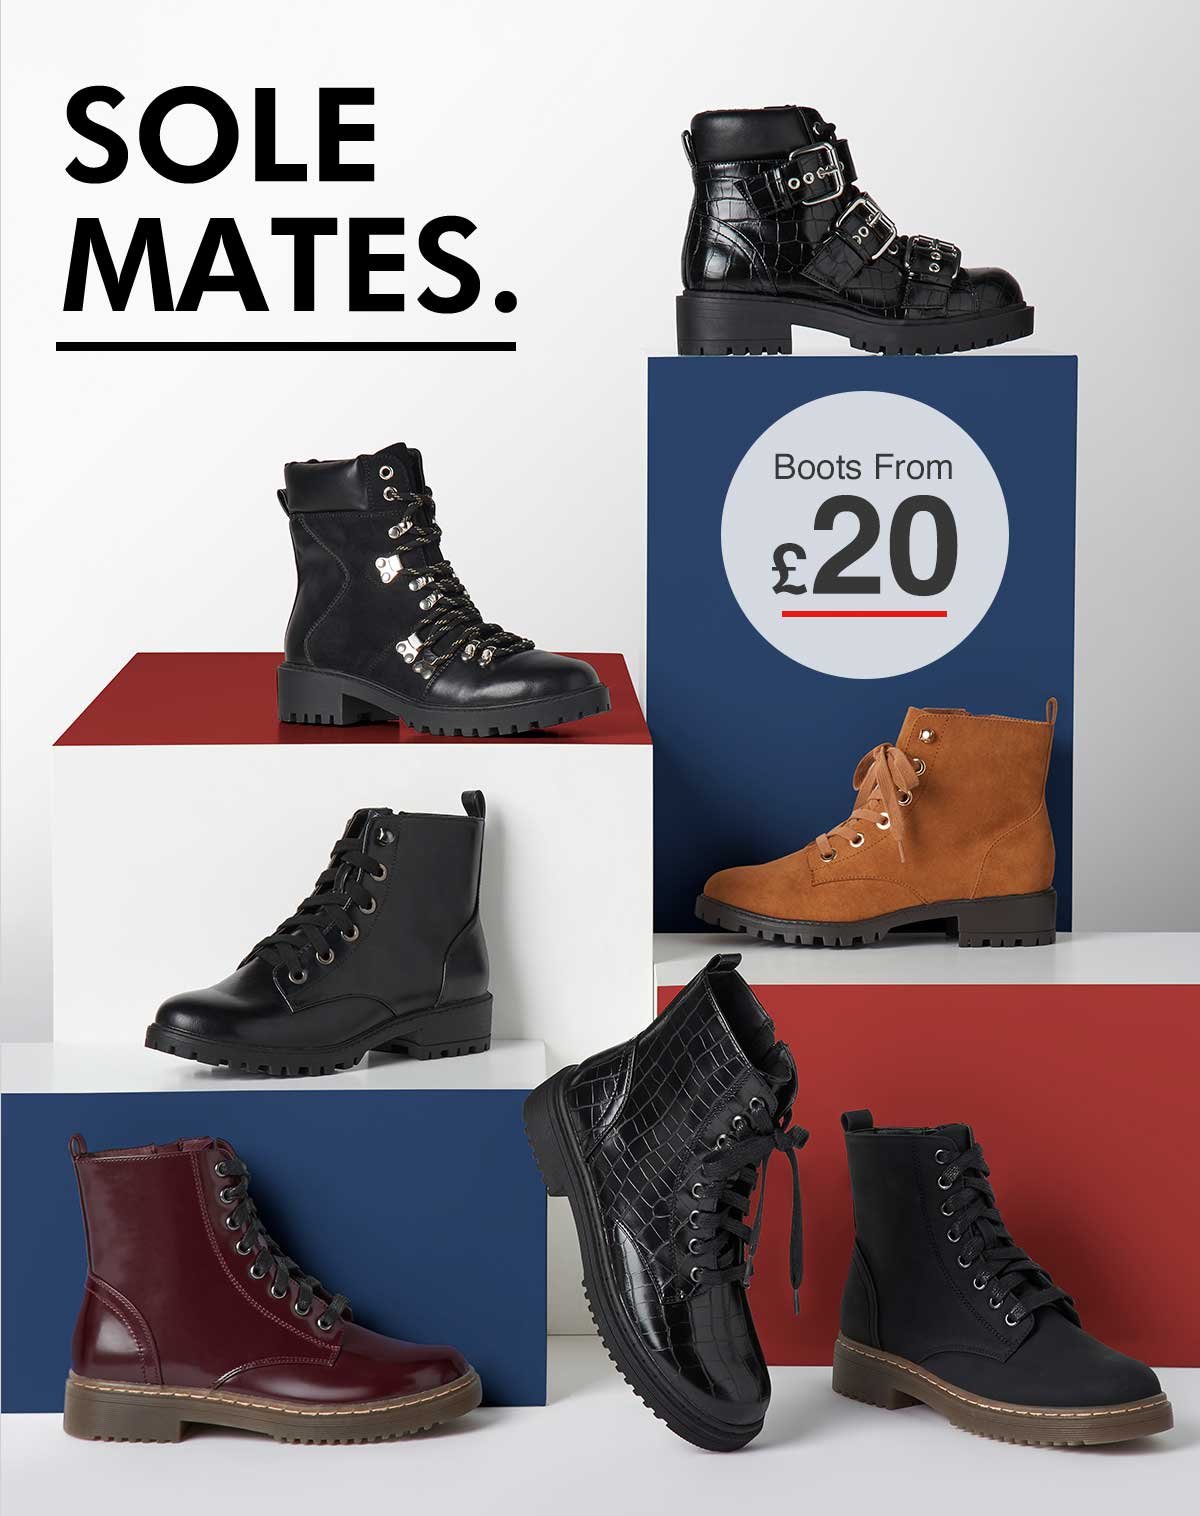 Matalan Direct: Hey, time for a reBOOT 